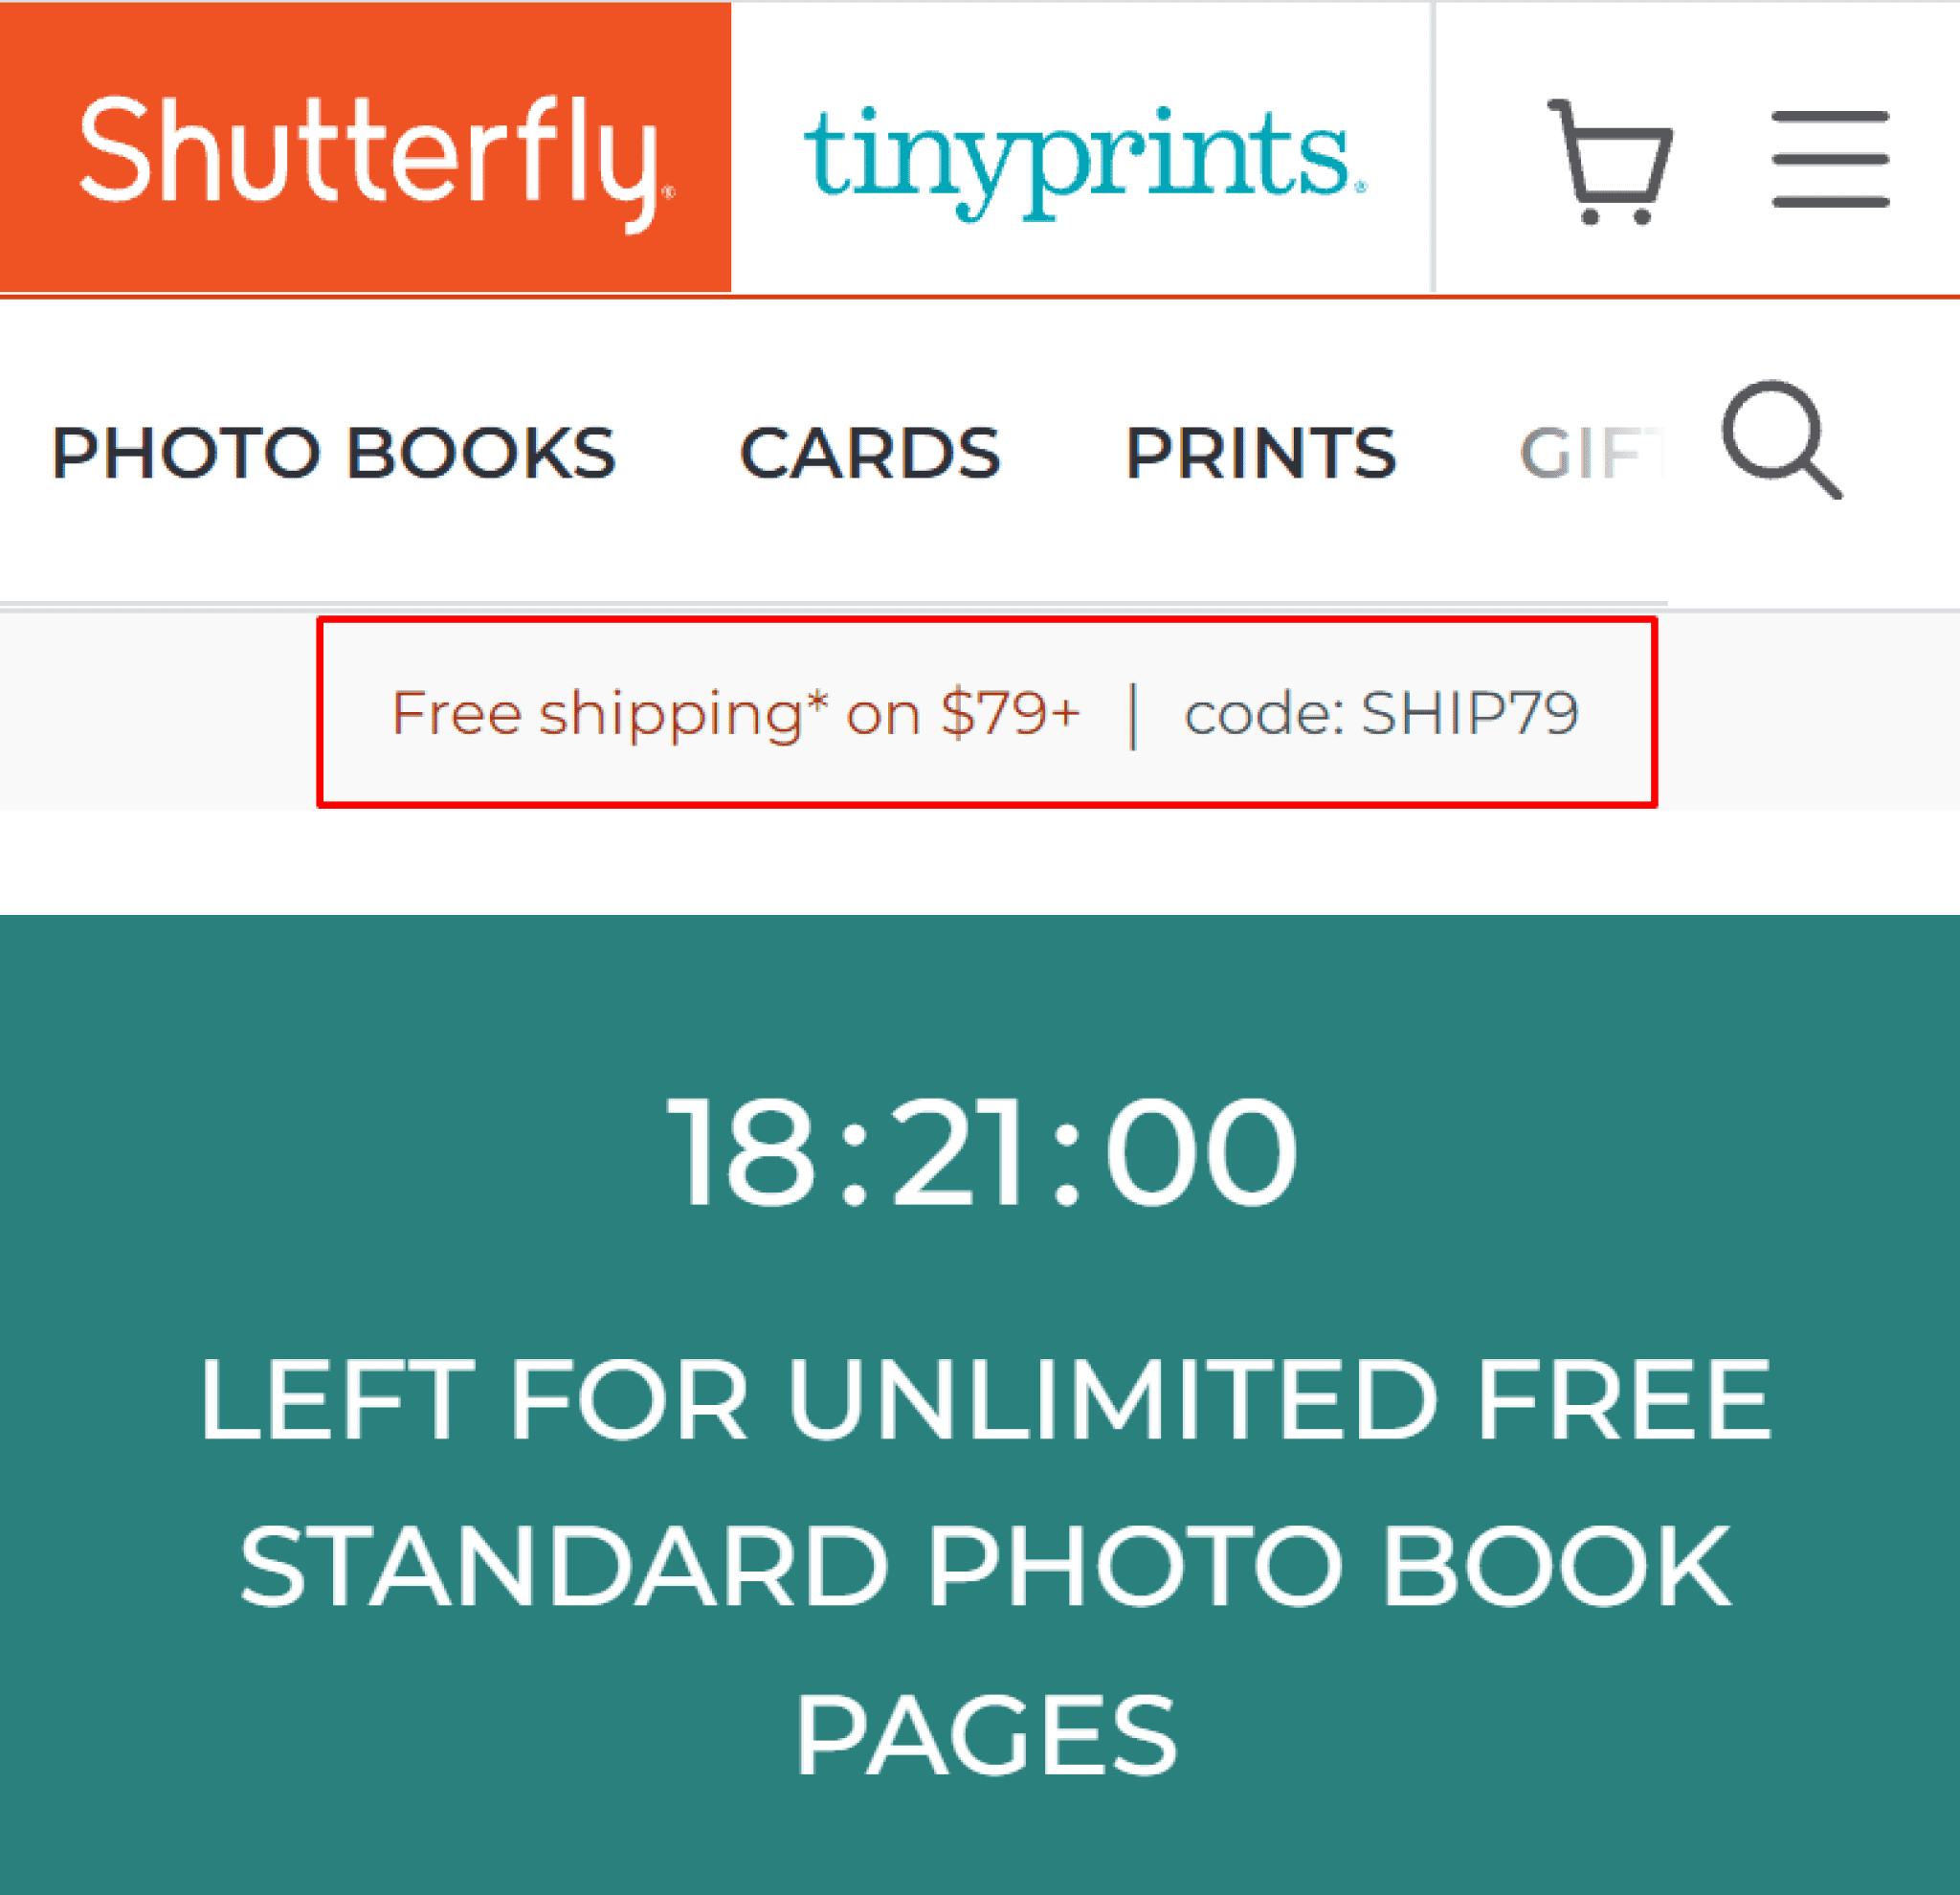 15 Ingenious Ways to Save Money on Shutterfly Photo Products